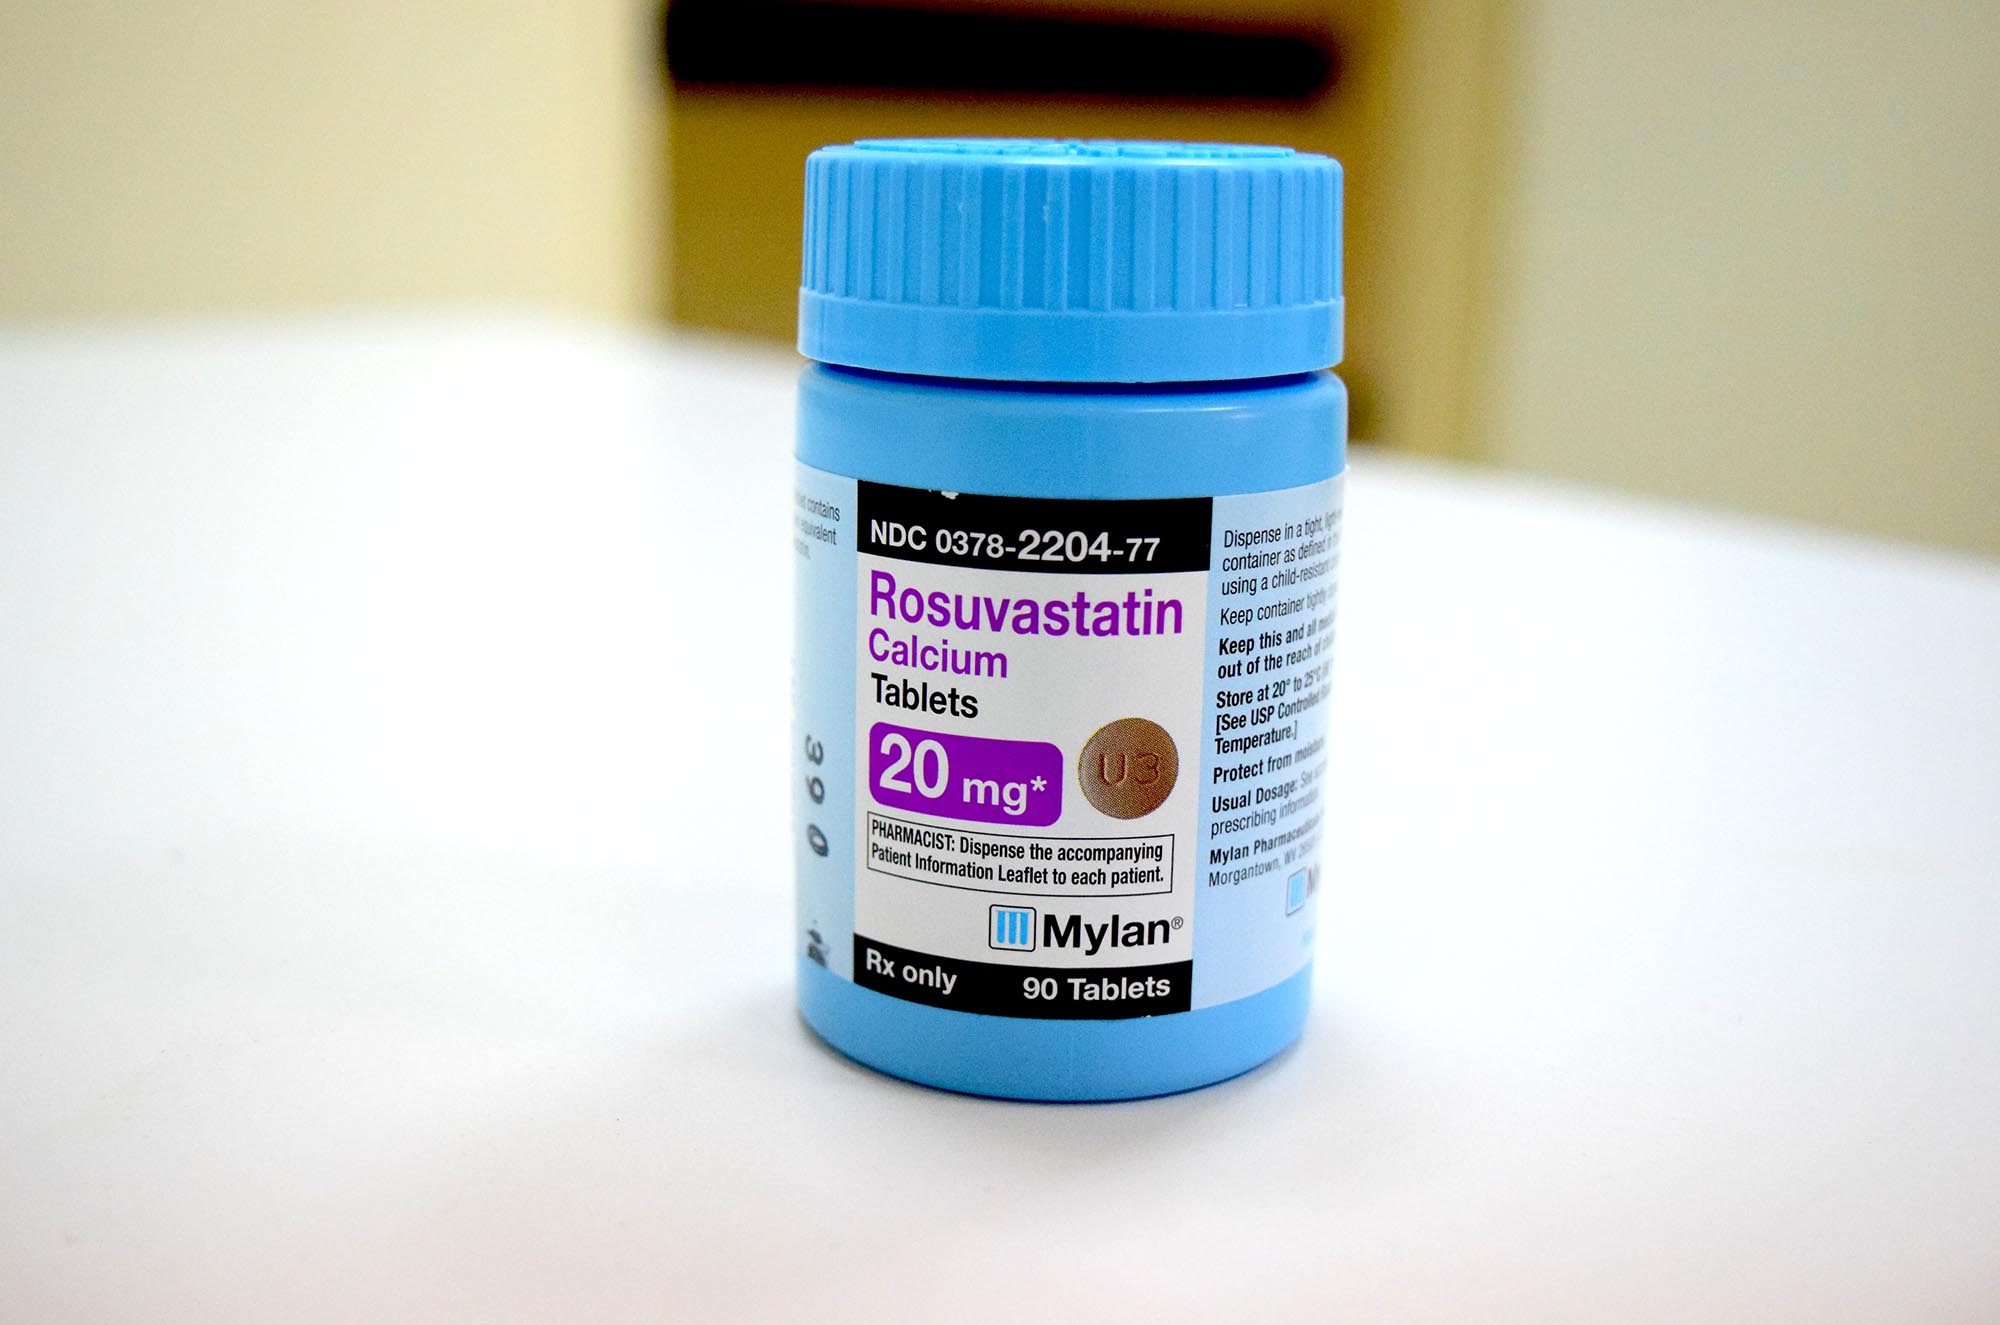 Rosuvastatin, an effective medicine for the treatment of high cholesterol